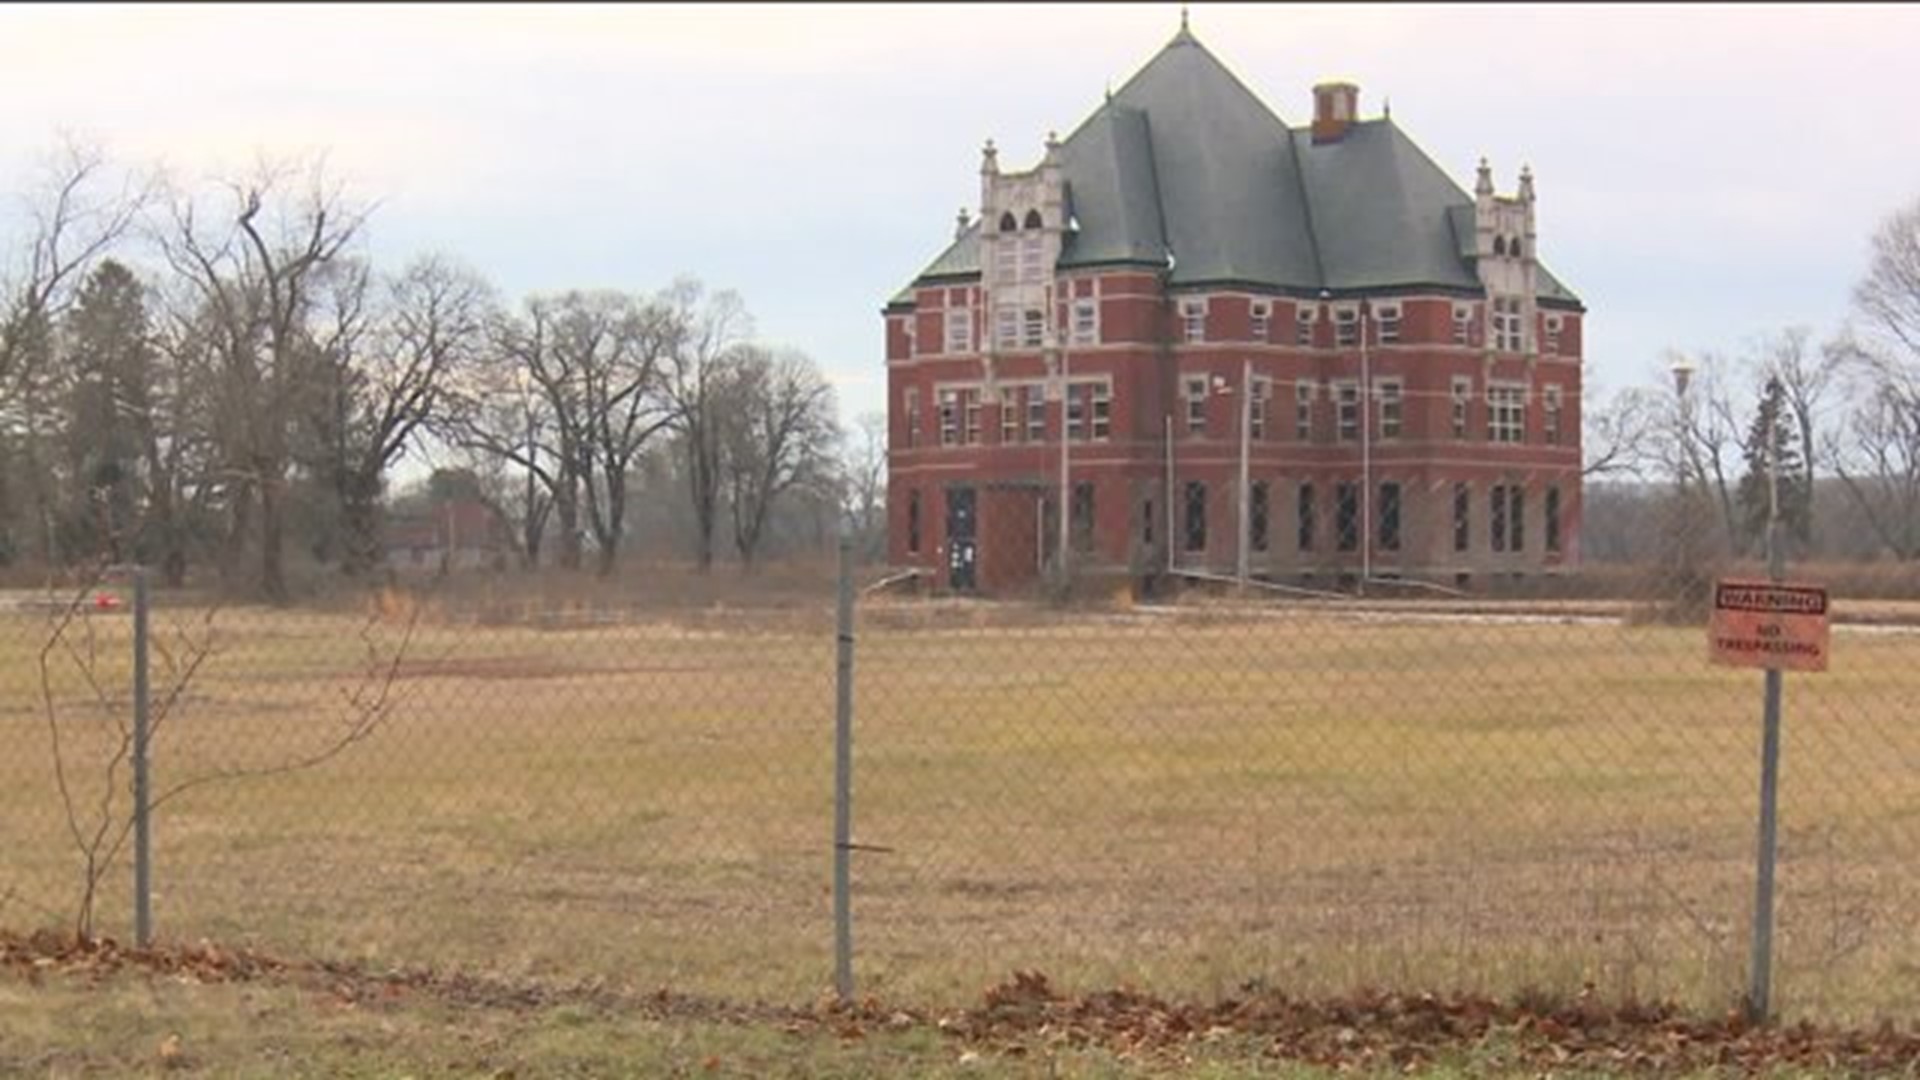 Mohegan Sun proposes redevelopment of Norwich State Hospital property